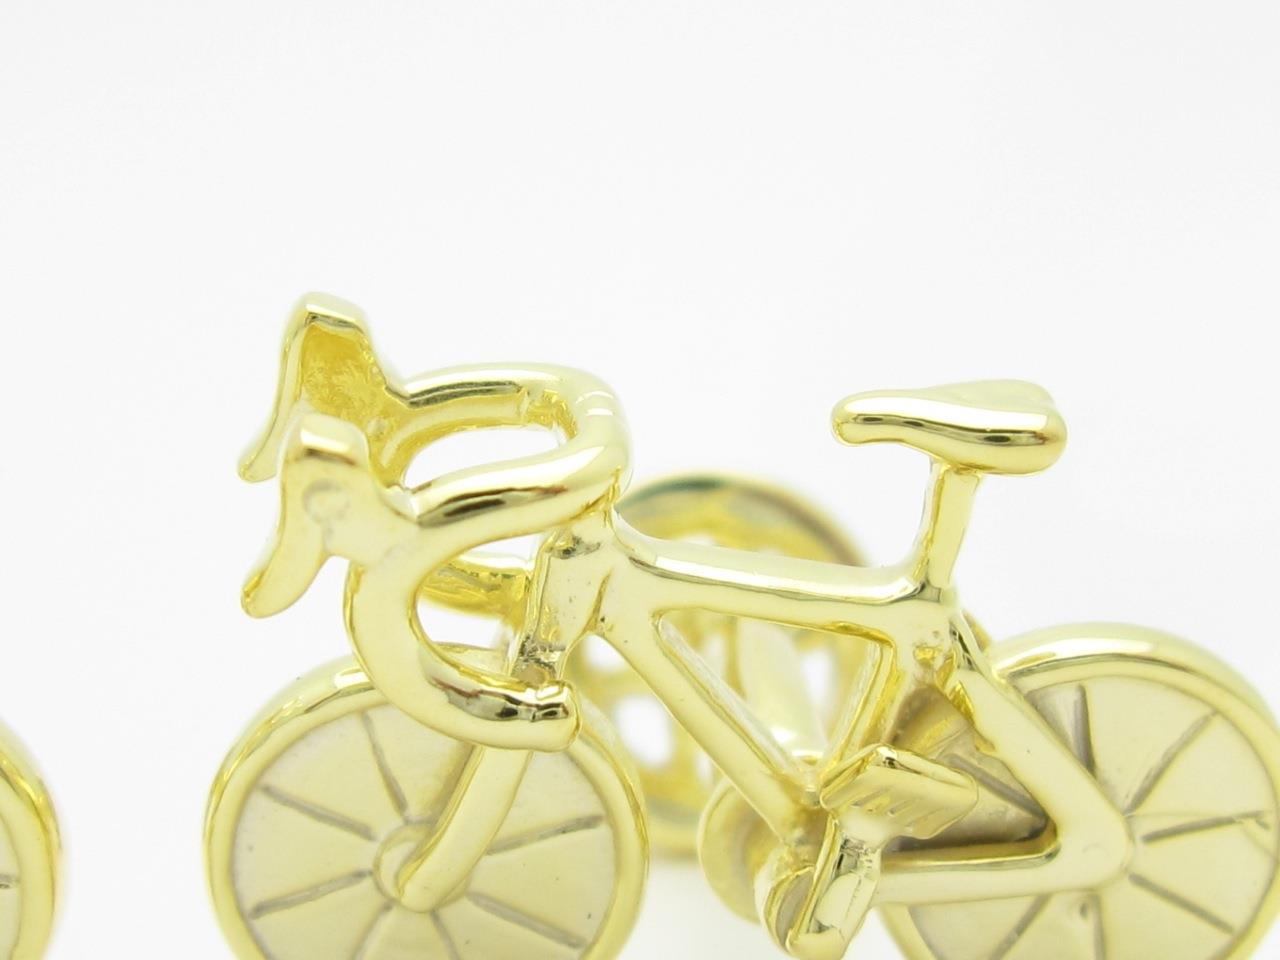 18k Gold Sterling Silver Custom Hand Made Bicycle 3D Design Cufflink Bridal Gift 